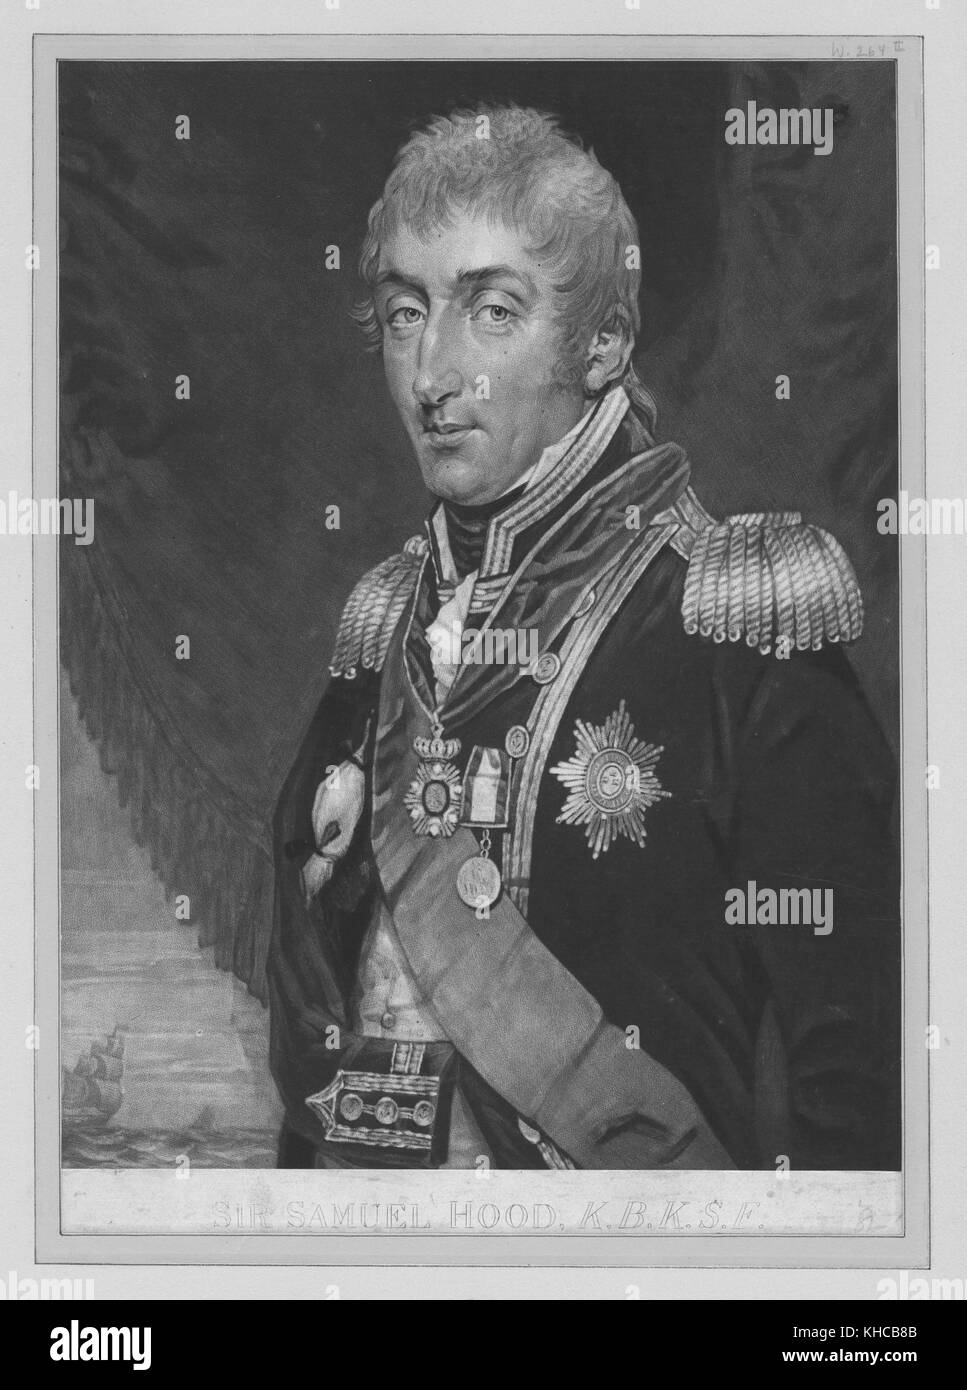 Half length portrait of Sir Samuel Hood, in uniform, wearing medals, known particularly for his service in the American Revolutionary War and French Revolutionary Wars, 1850. From the New York Public Library. Stock Photo